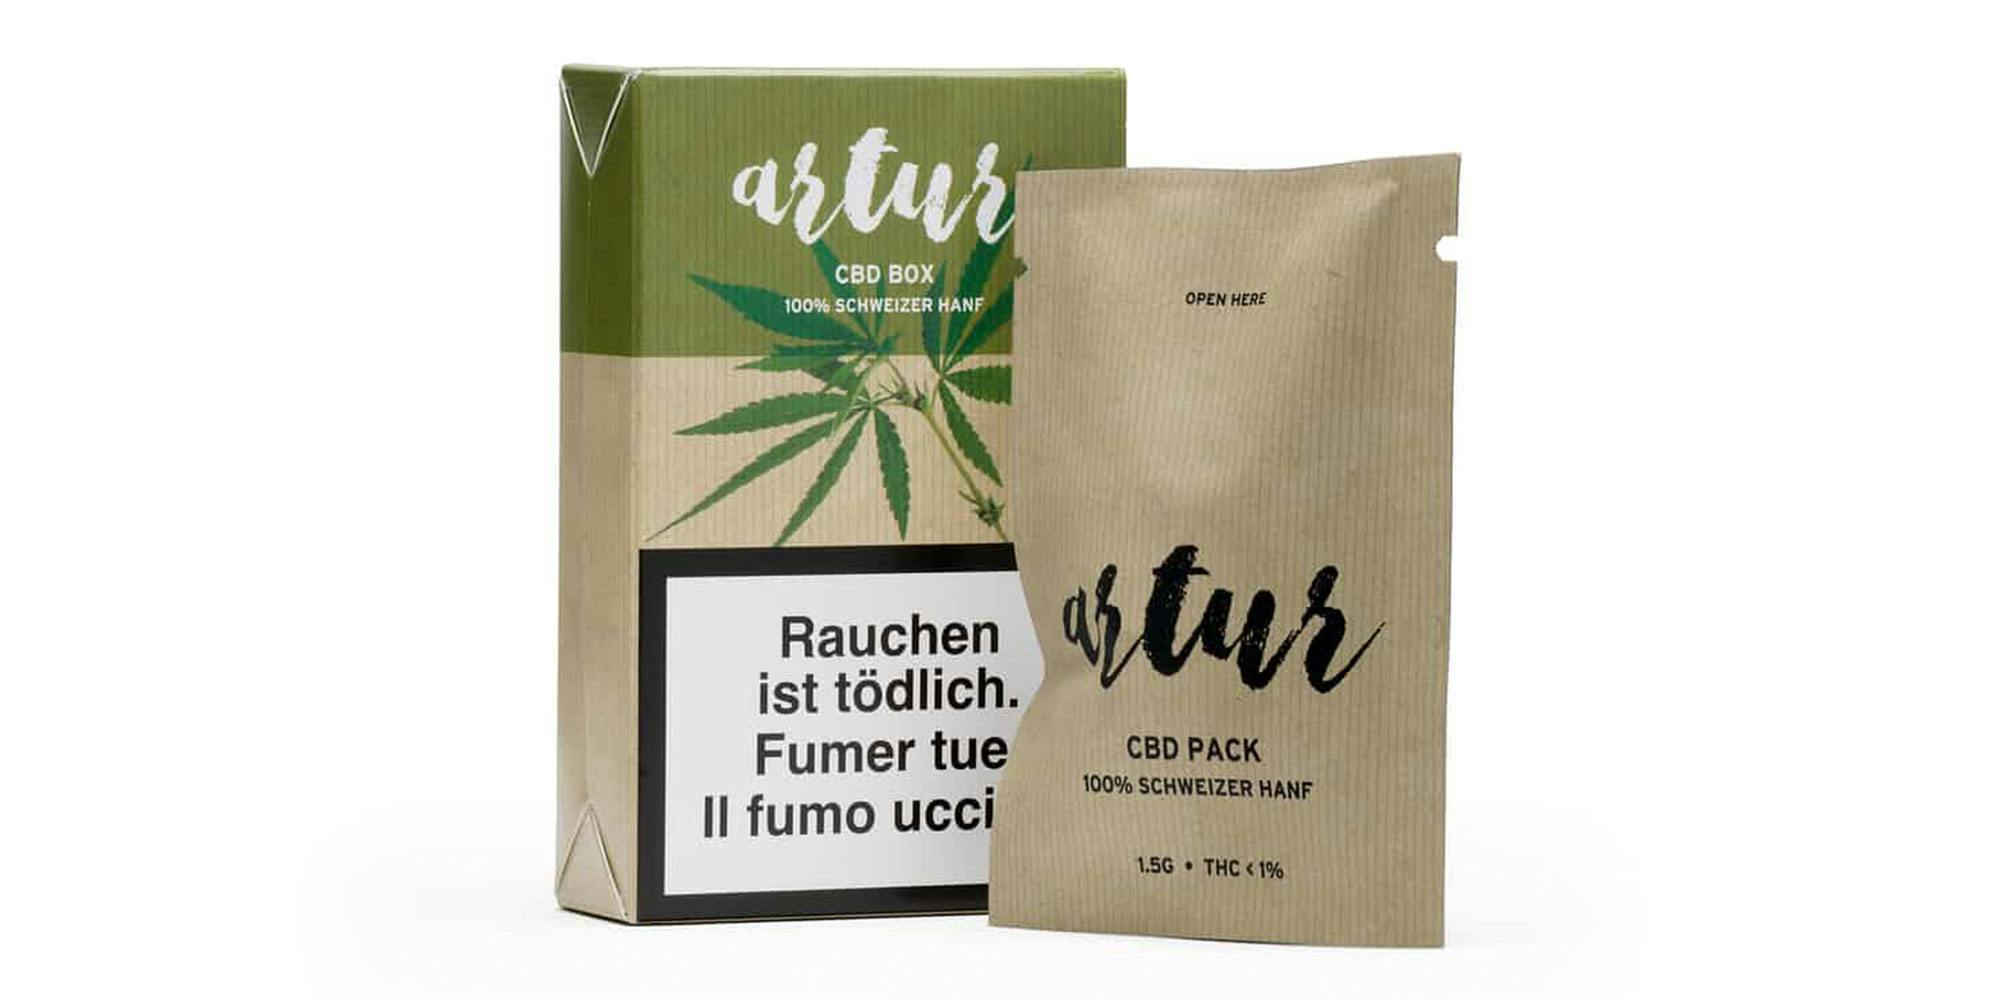 Swiss Supermarket Lidl Sells Rolling CBD Next To Tobacco To Help People Quit Cigarettes